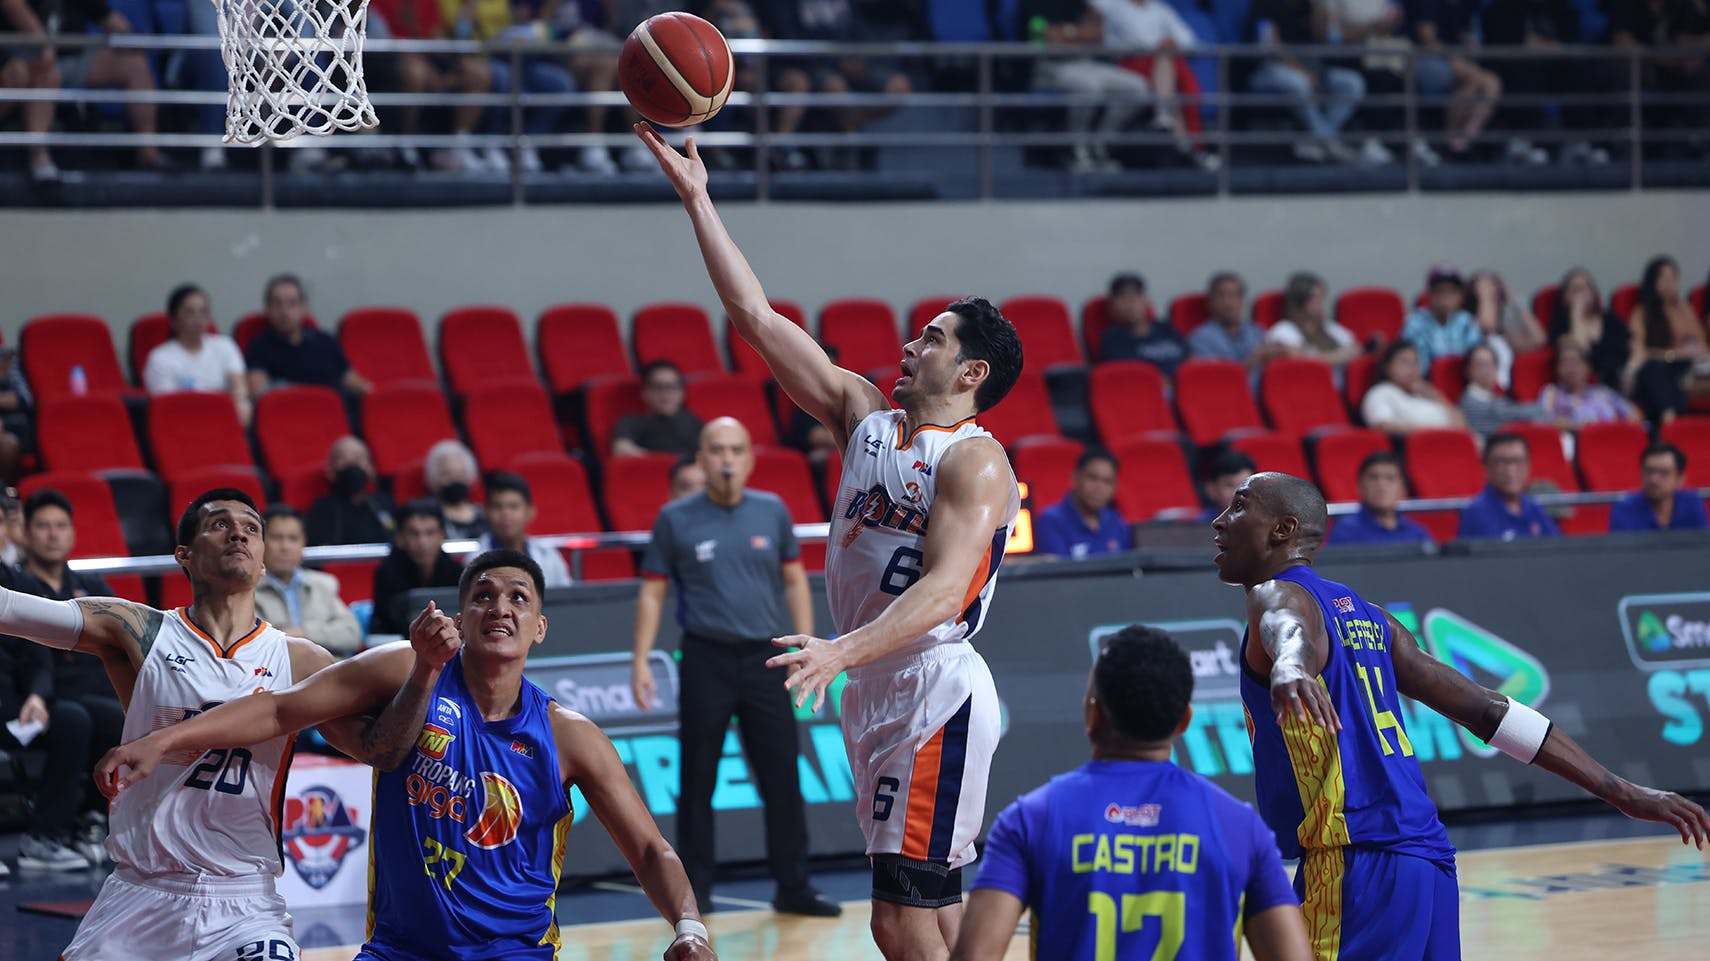 Meralco holds off TNT as Chris Banchero makes immediate impact in return from injury